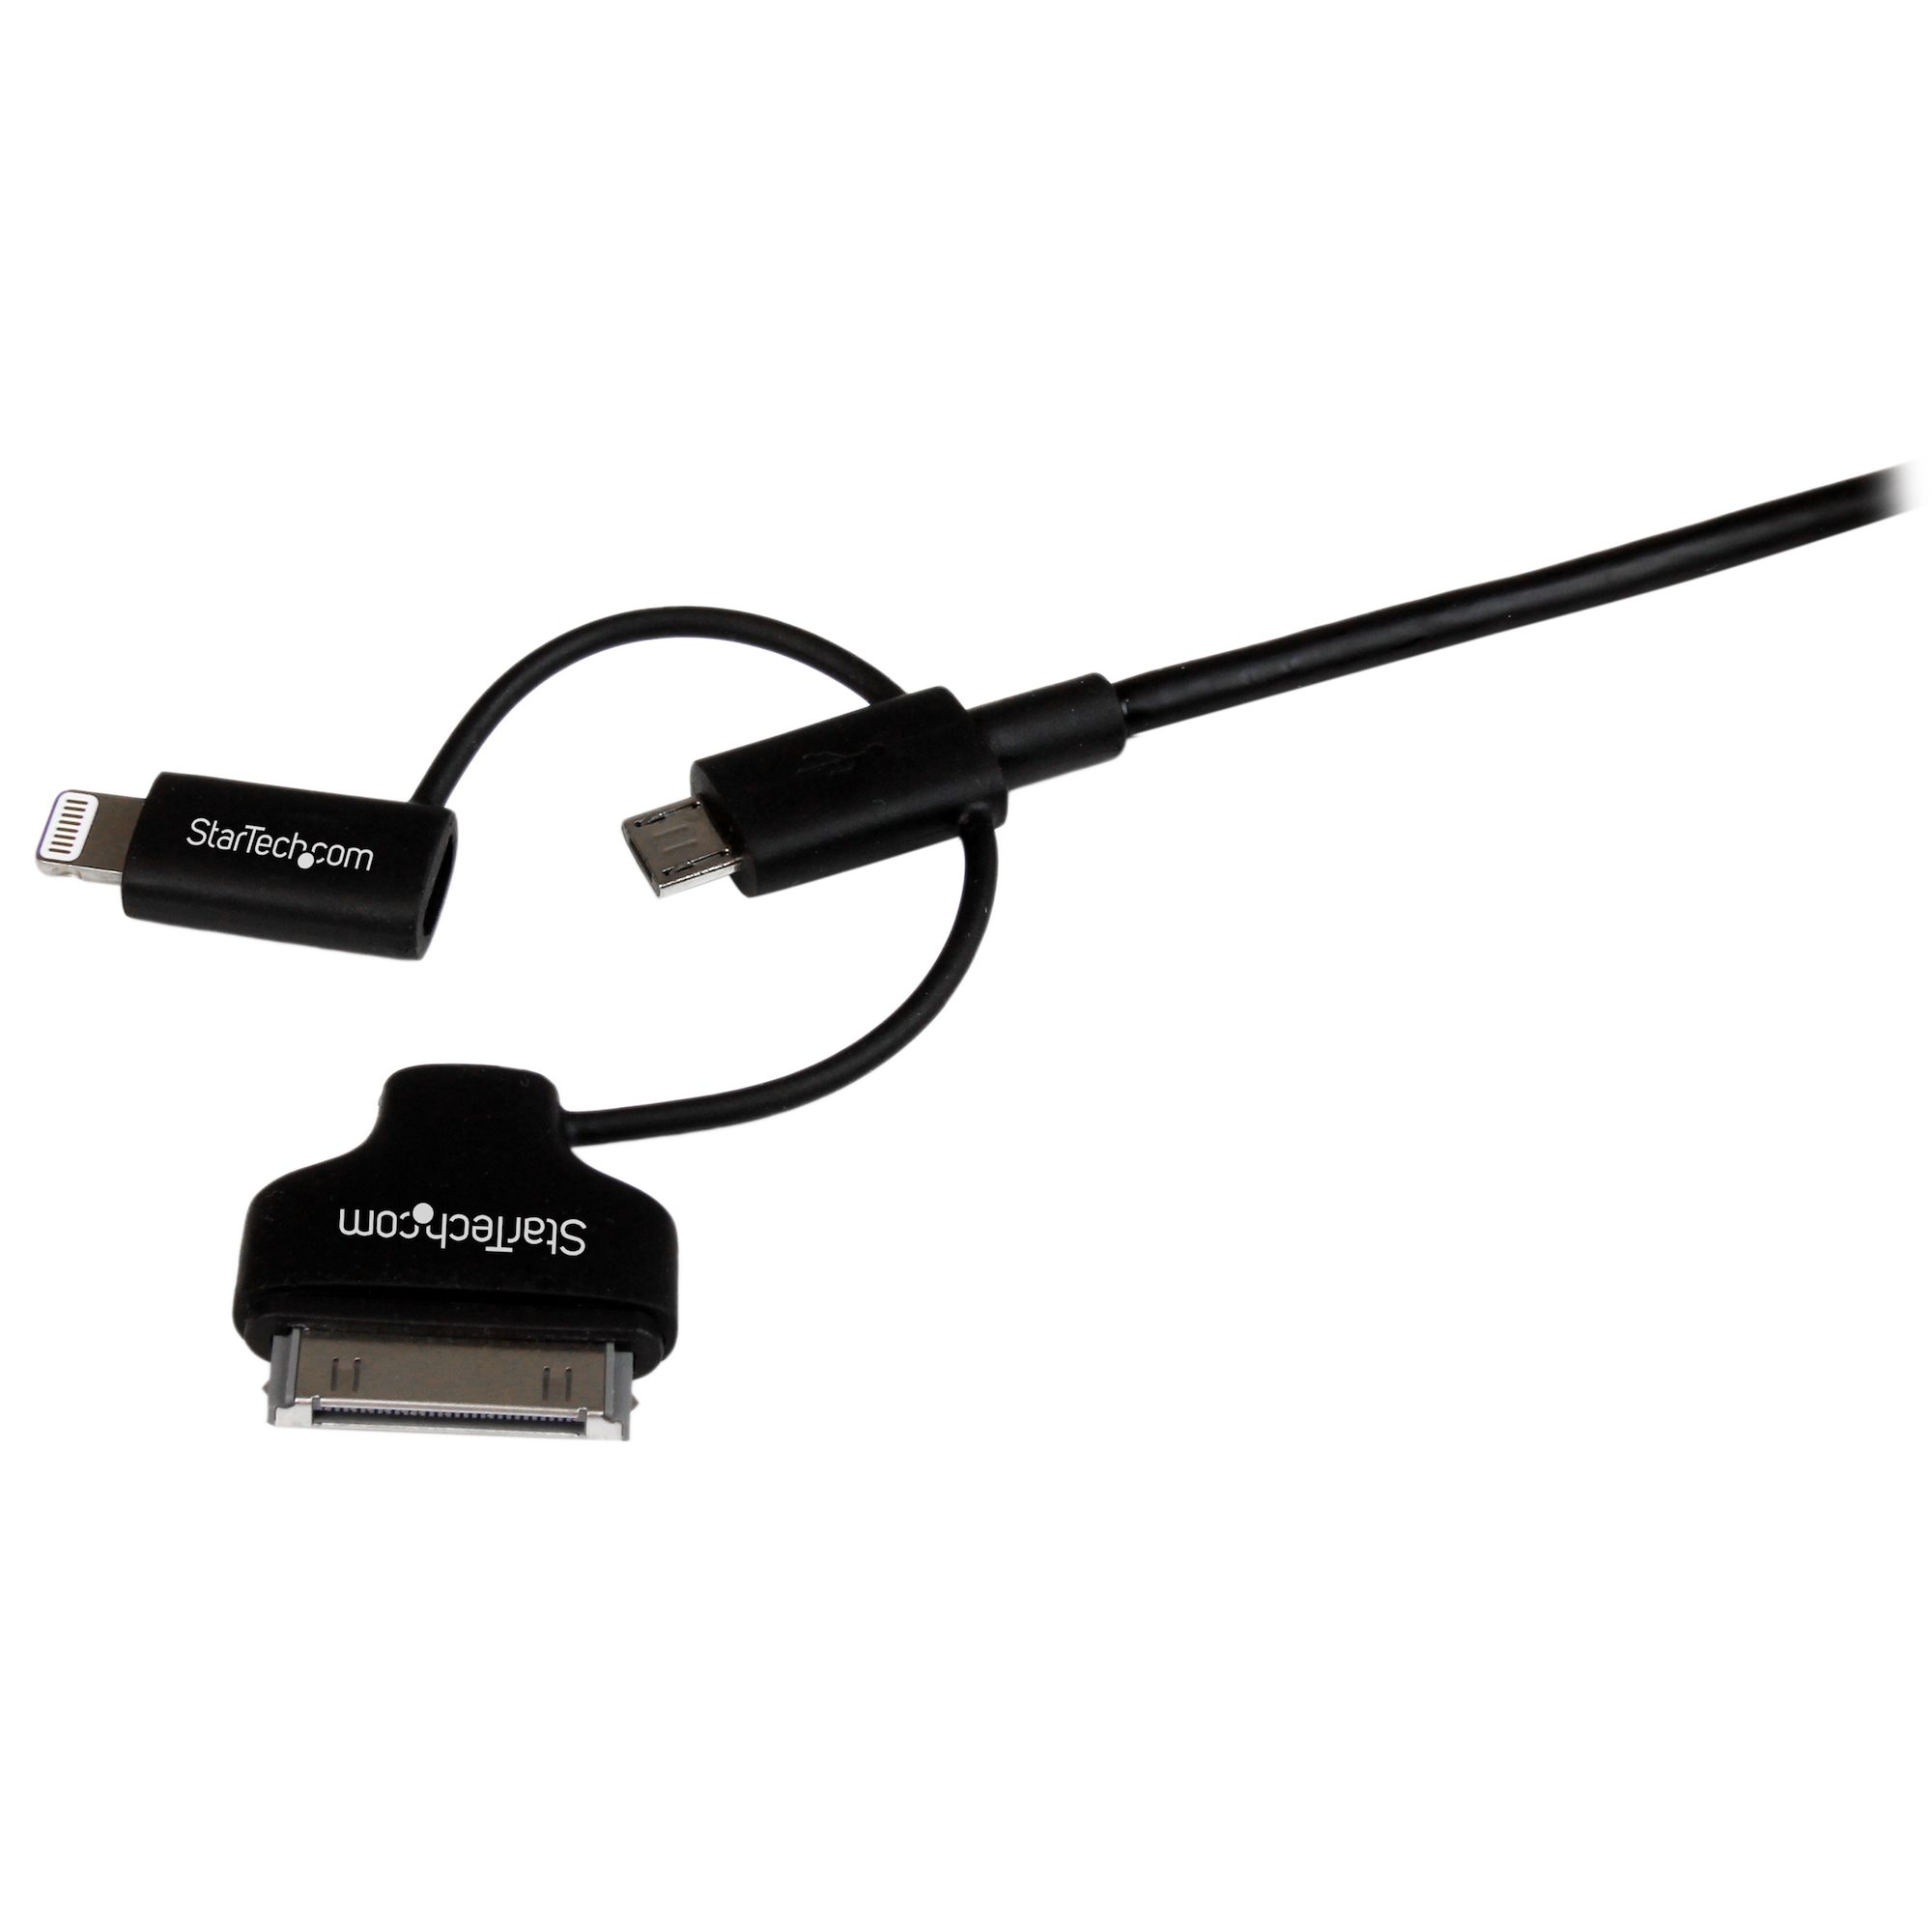 1m Lightning/Dock/Micro USB USB Cable - Cables |